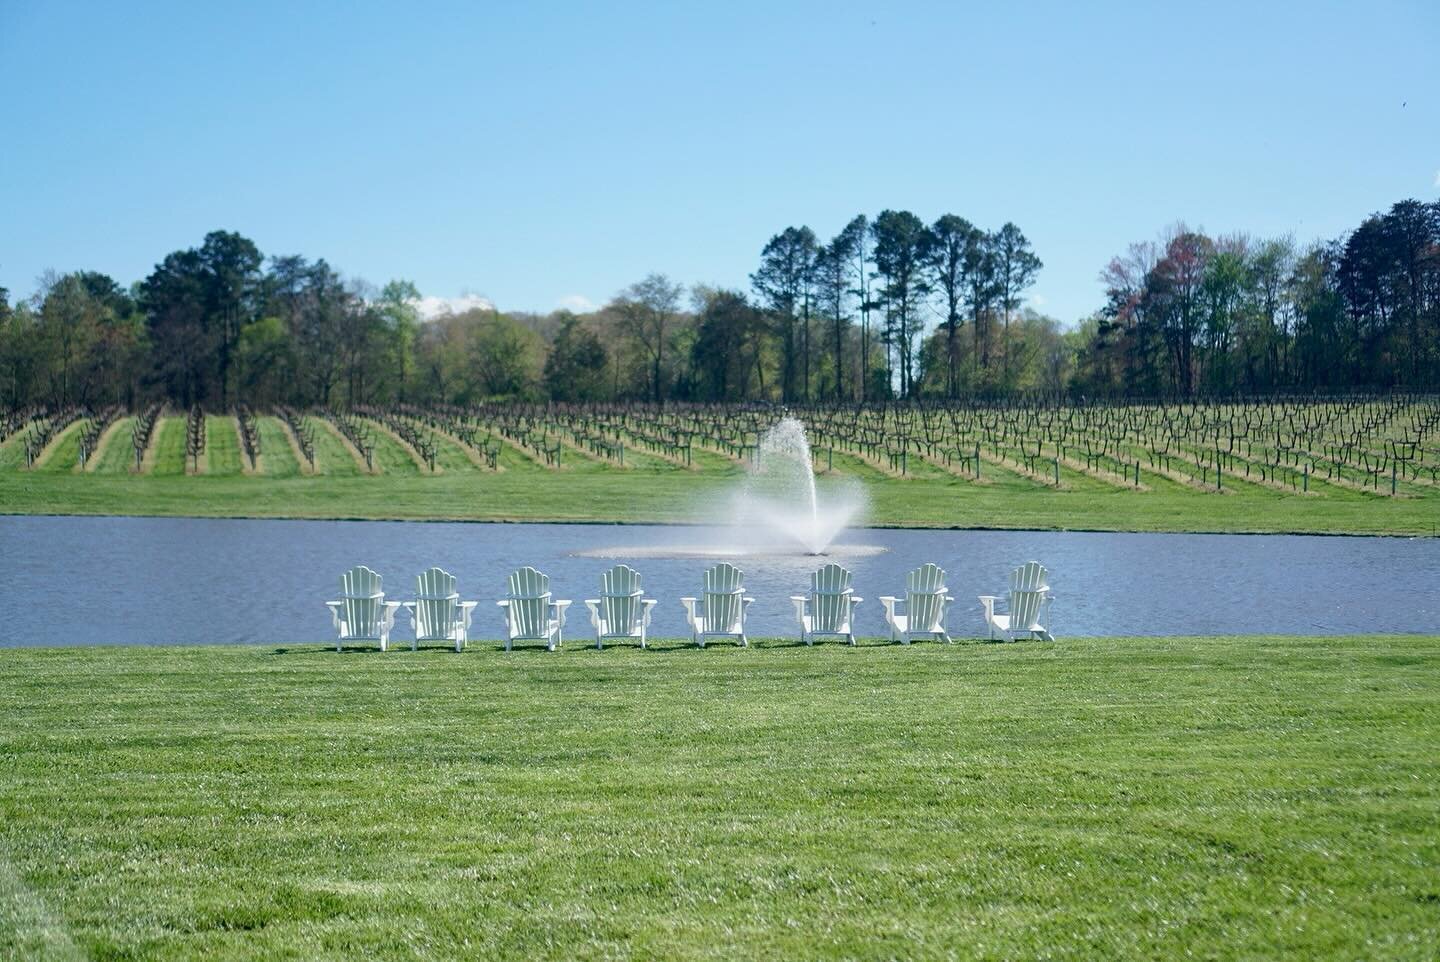 Let the wind blow you out to Shadow Springs this weekend 💨😊 The vineyard is looking beautiful as it starts to wake up for spring 🌿

#ncwine 
#visitnc 
#yadkinvalley